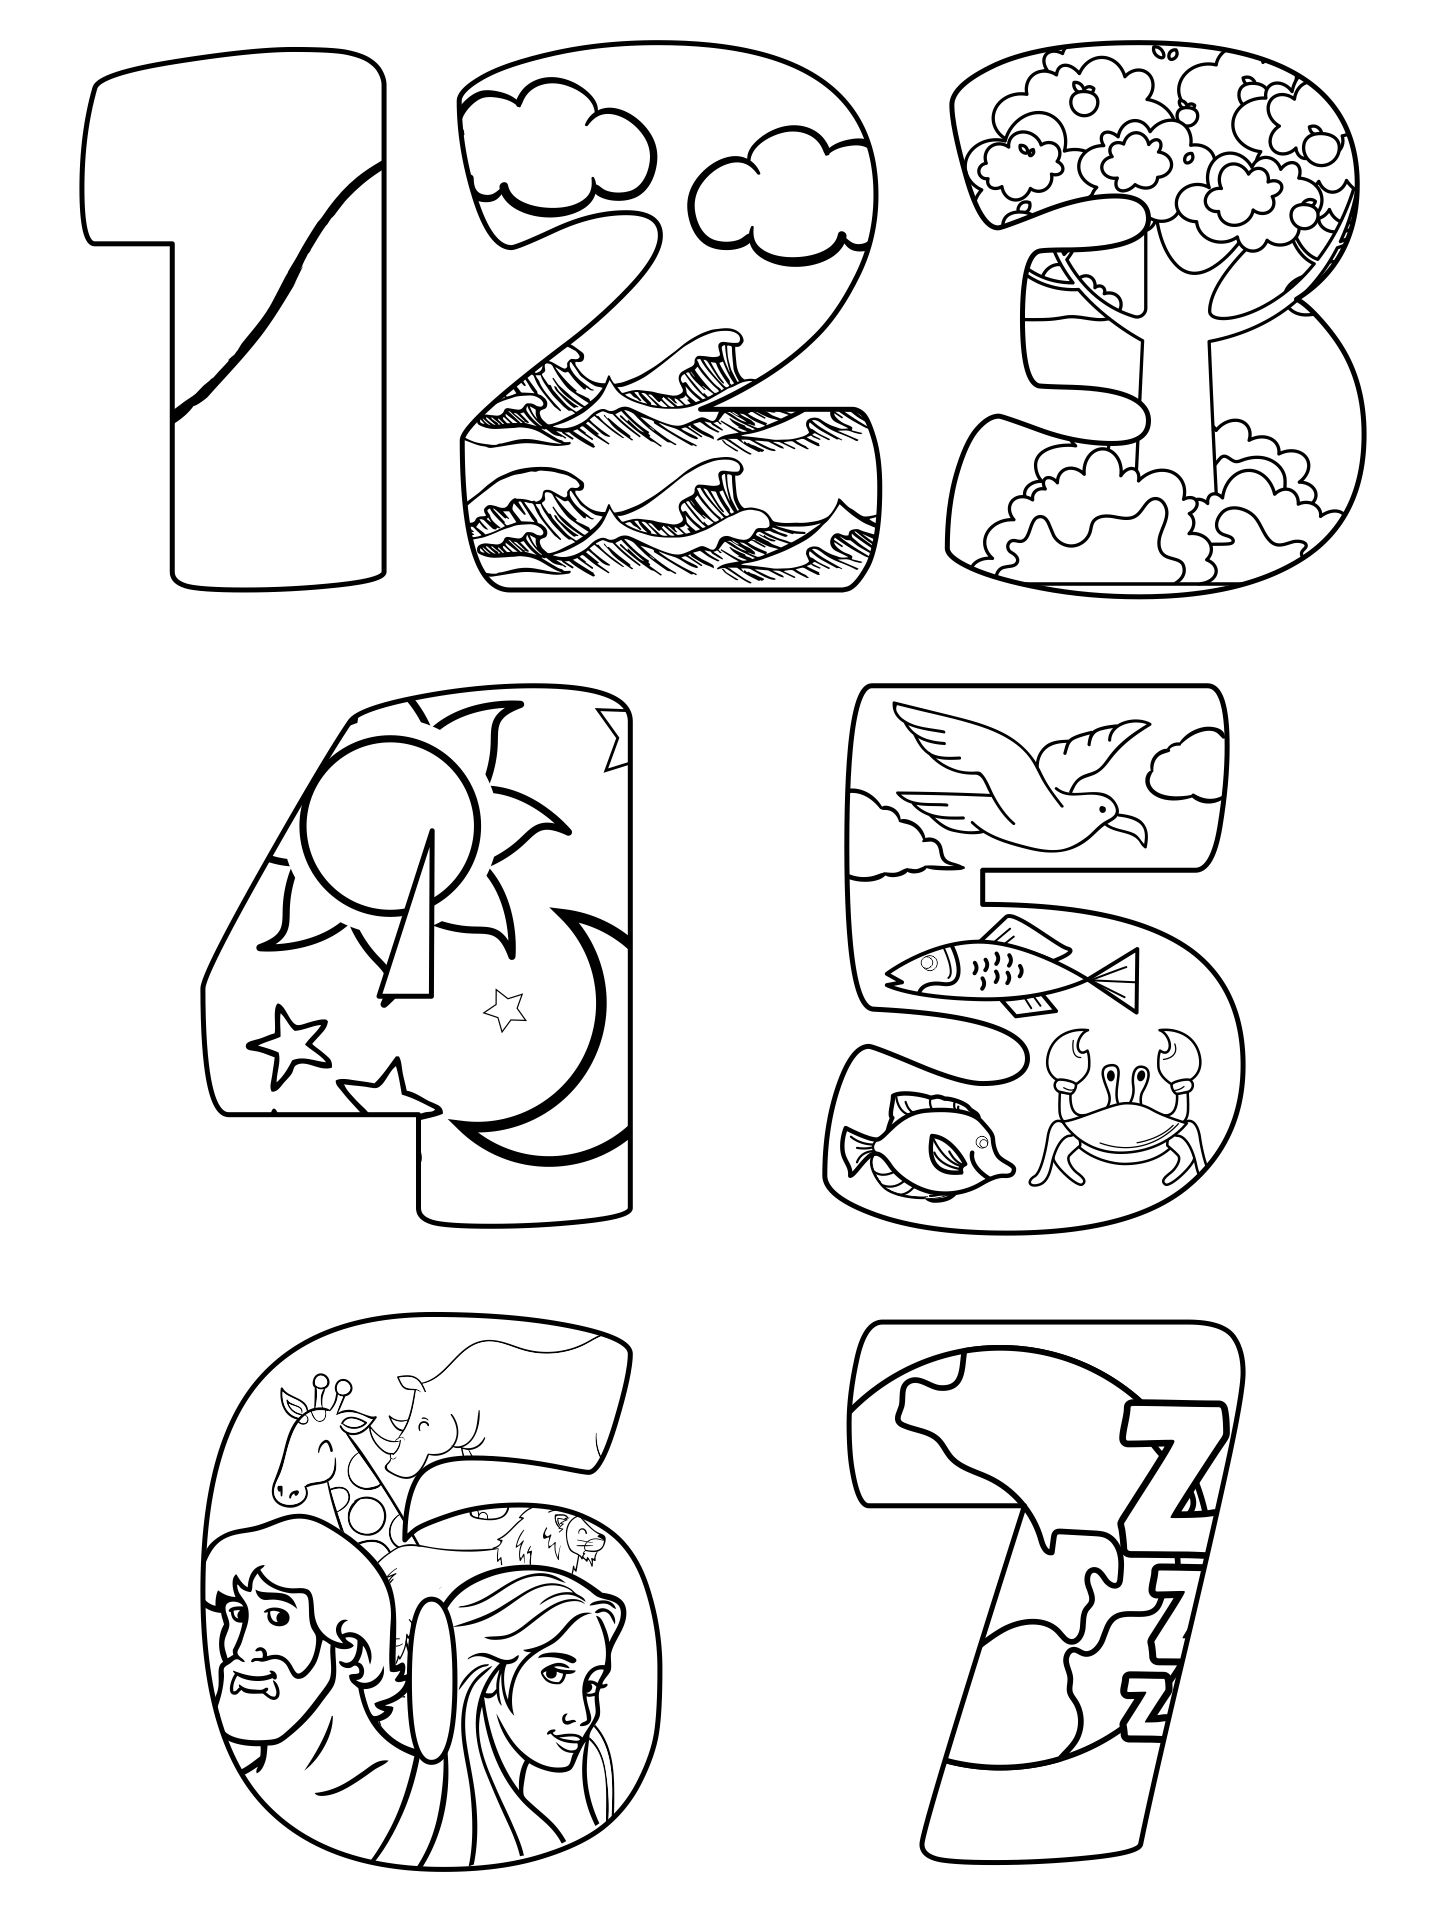 Days of Creation Coloring Pages for Kids